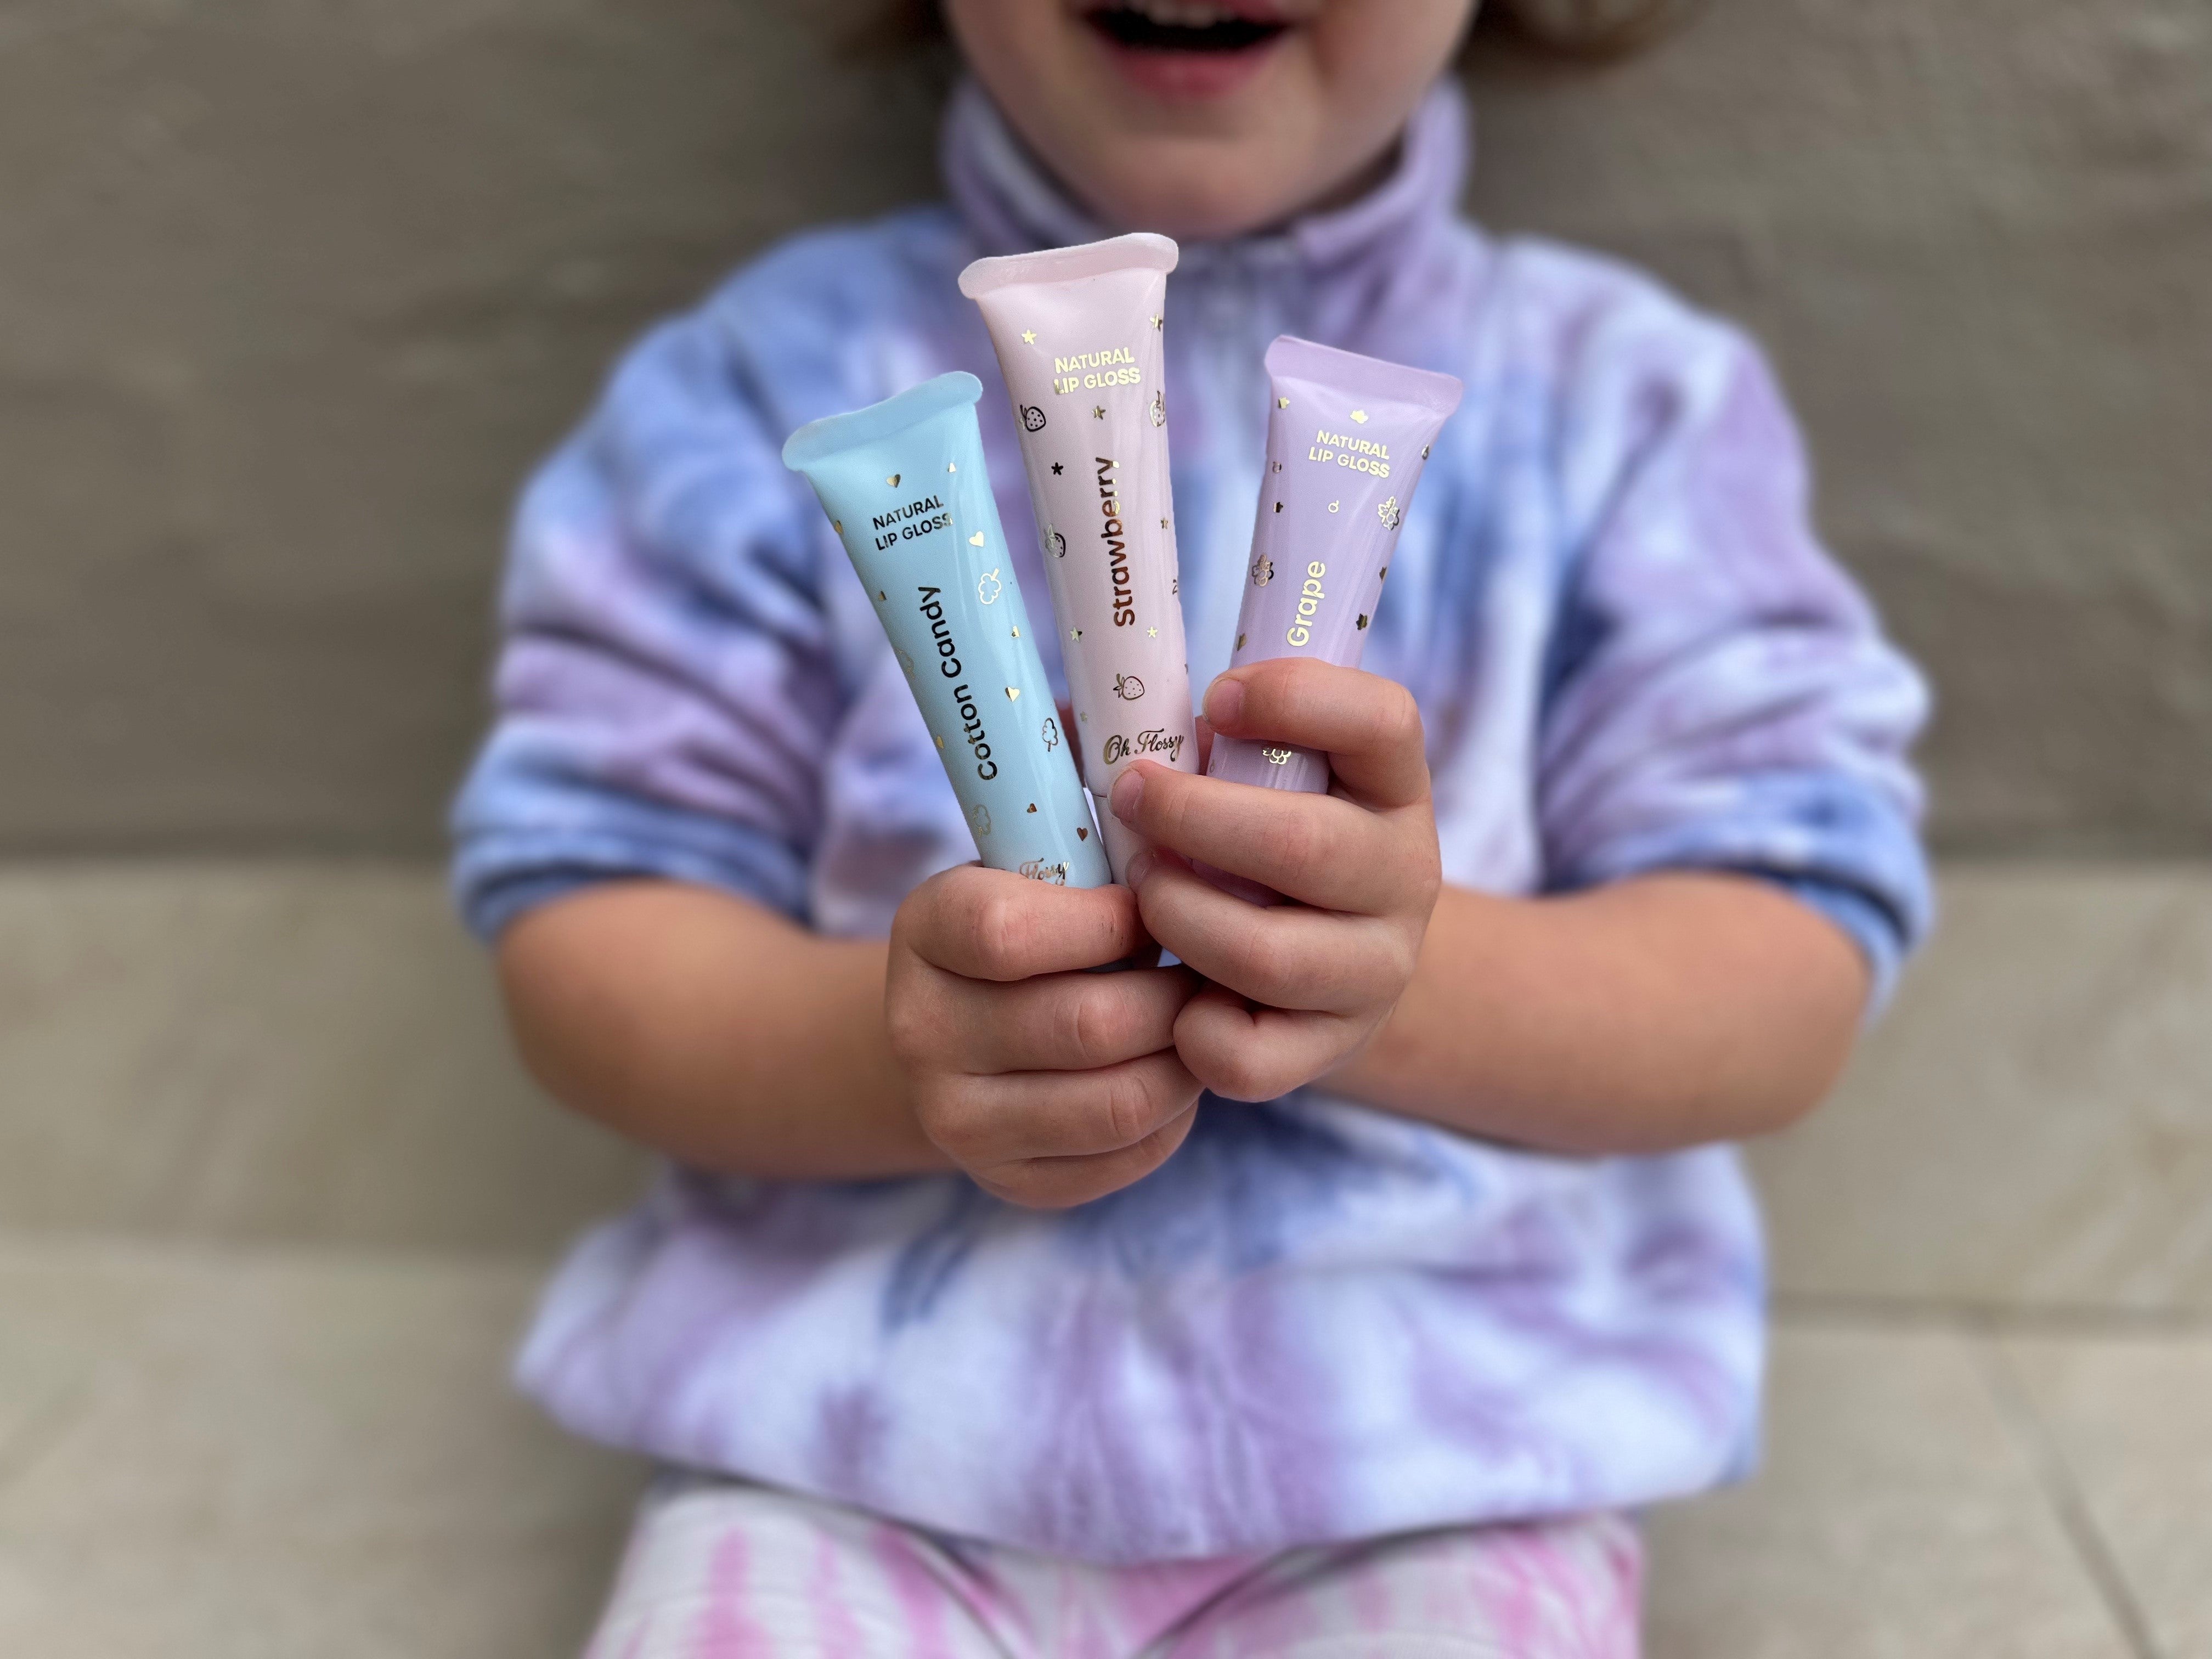 Ellaslist reviews the new Natural Lip Gloss range from Oh Flossy